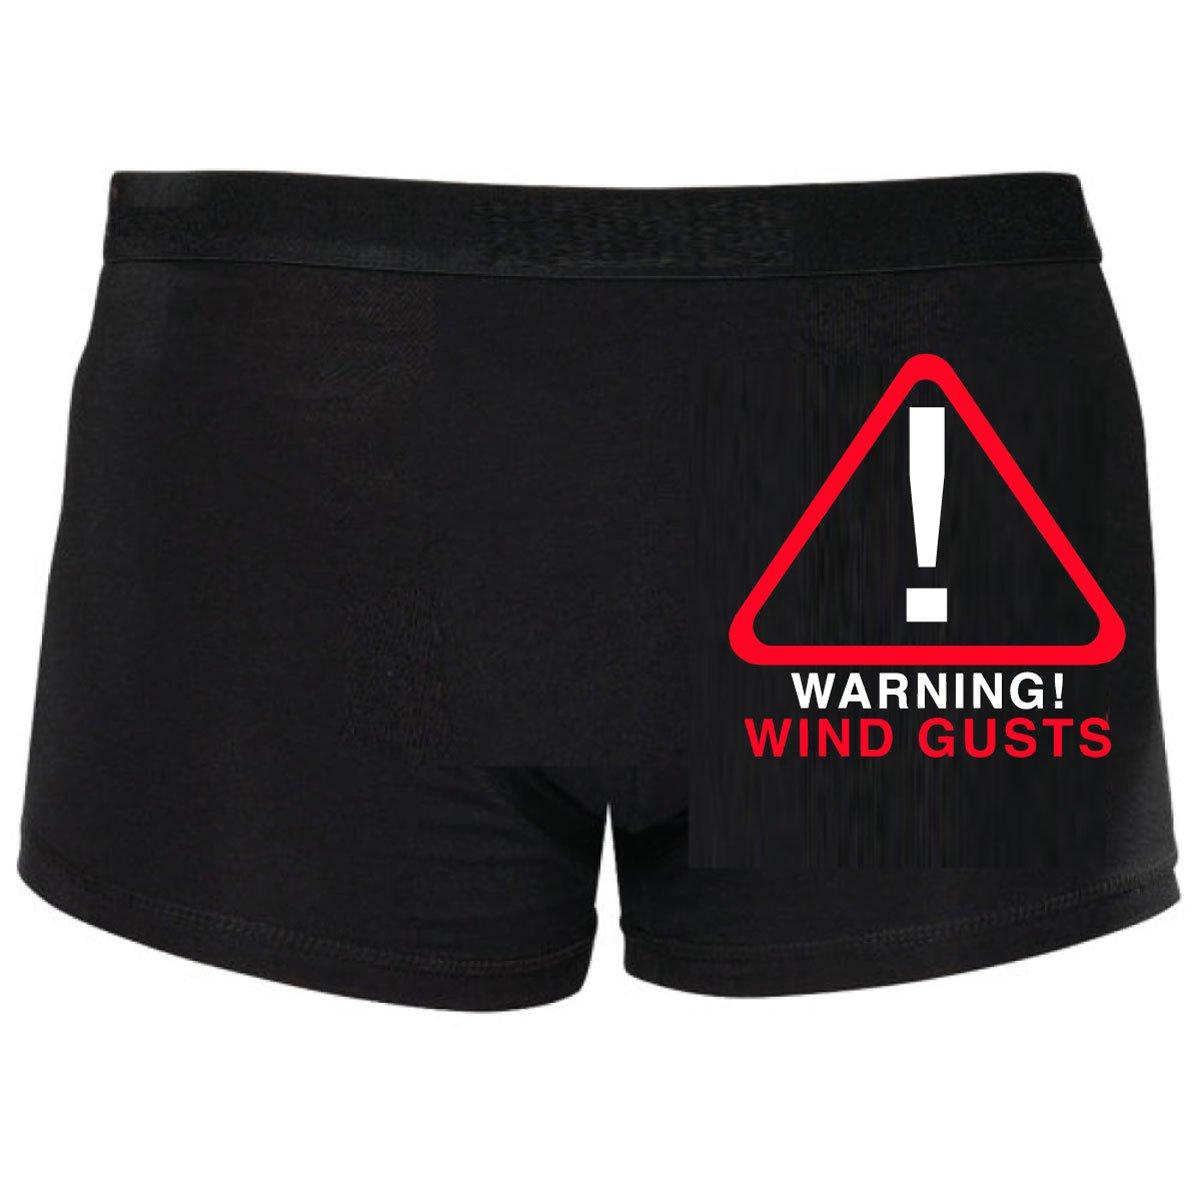 Funny Boxers Warning Wind Gusts Fart Trump Shorty Boxers